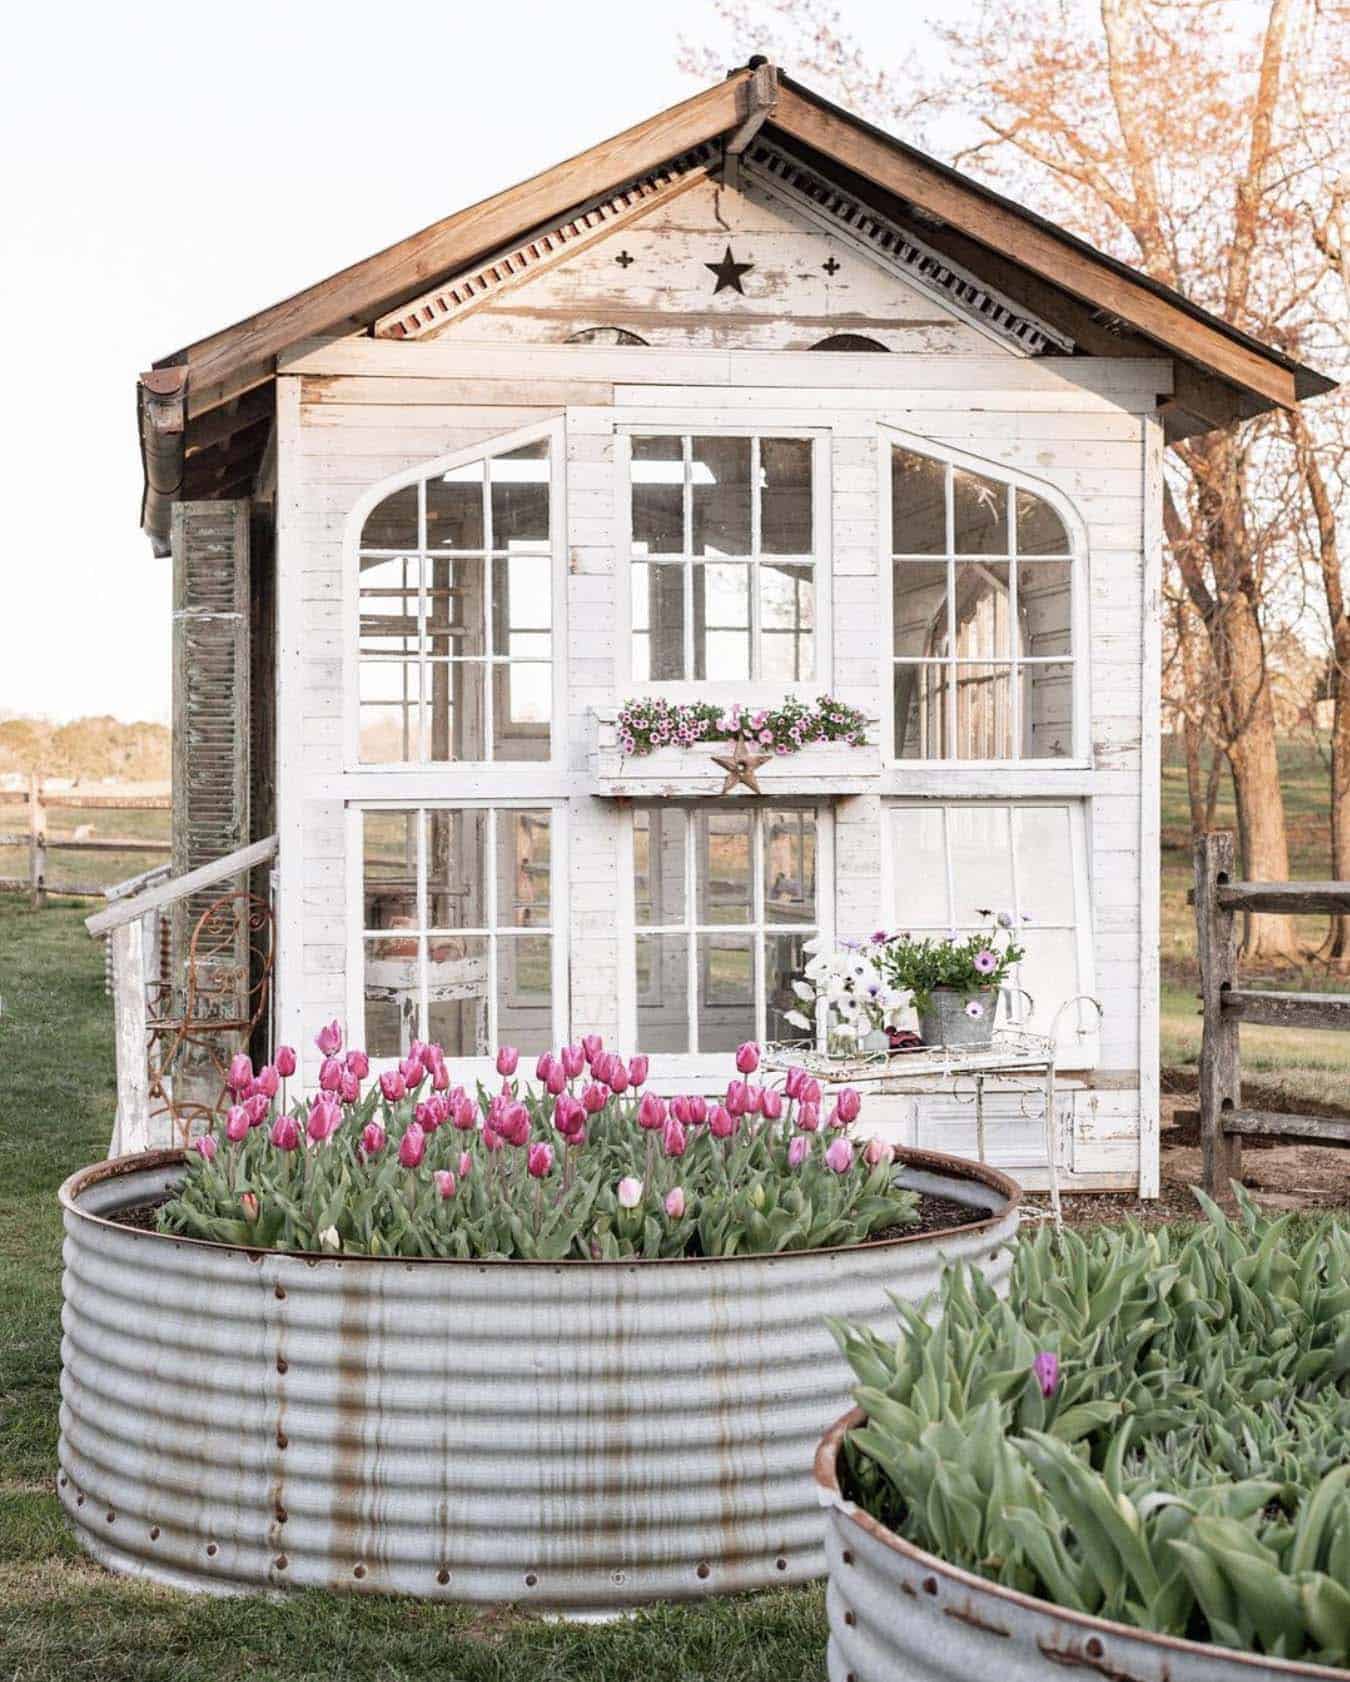 the flower shed greenhouse with a galvanized container planted with tulips